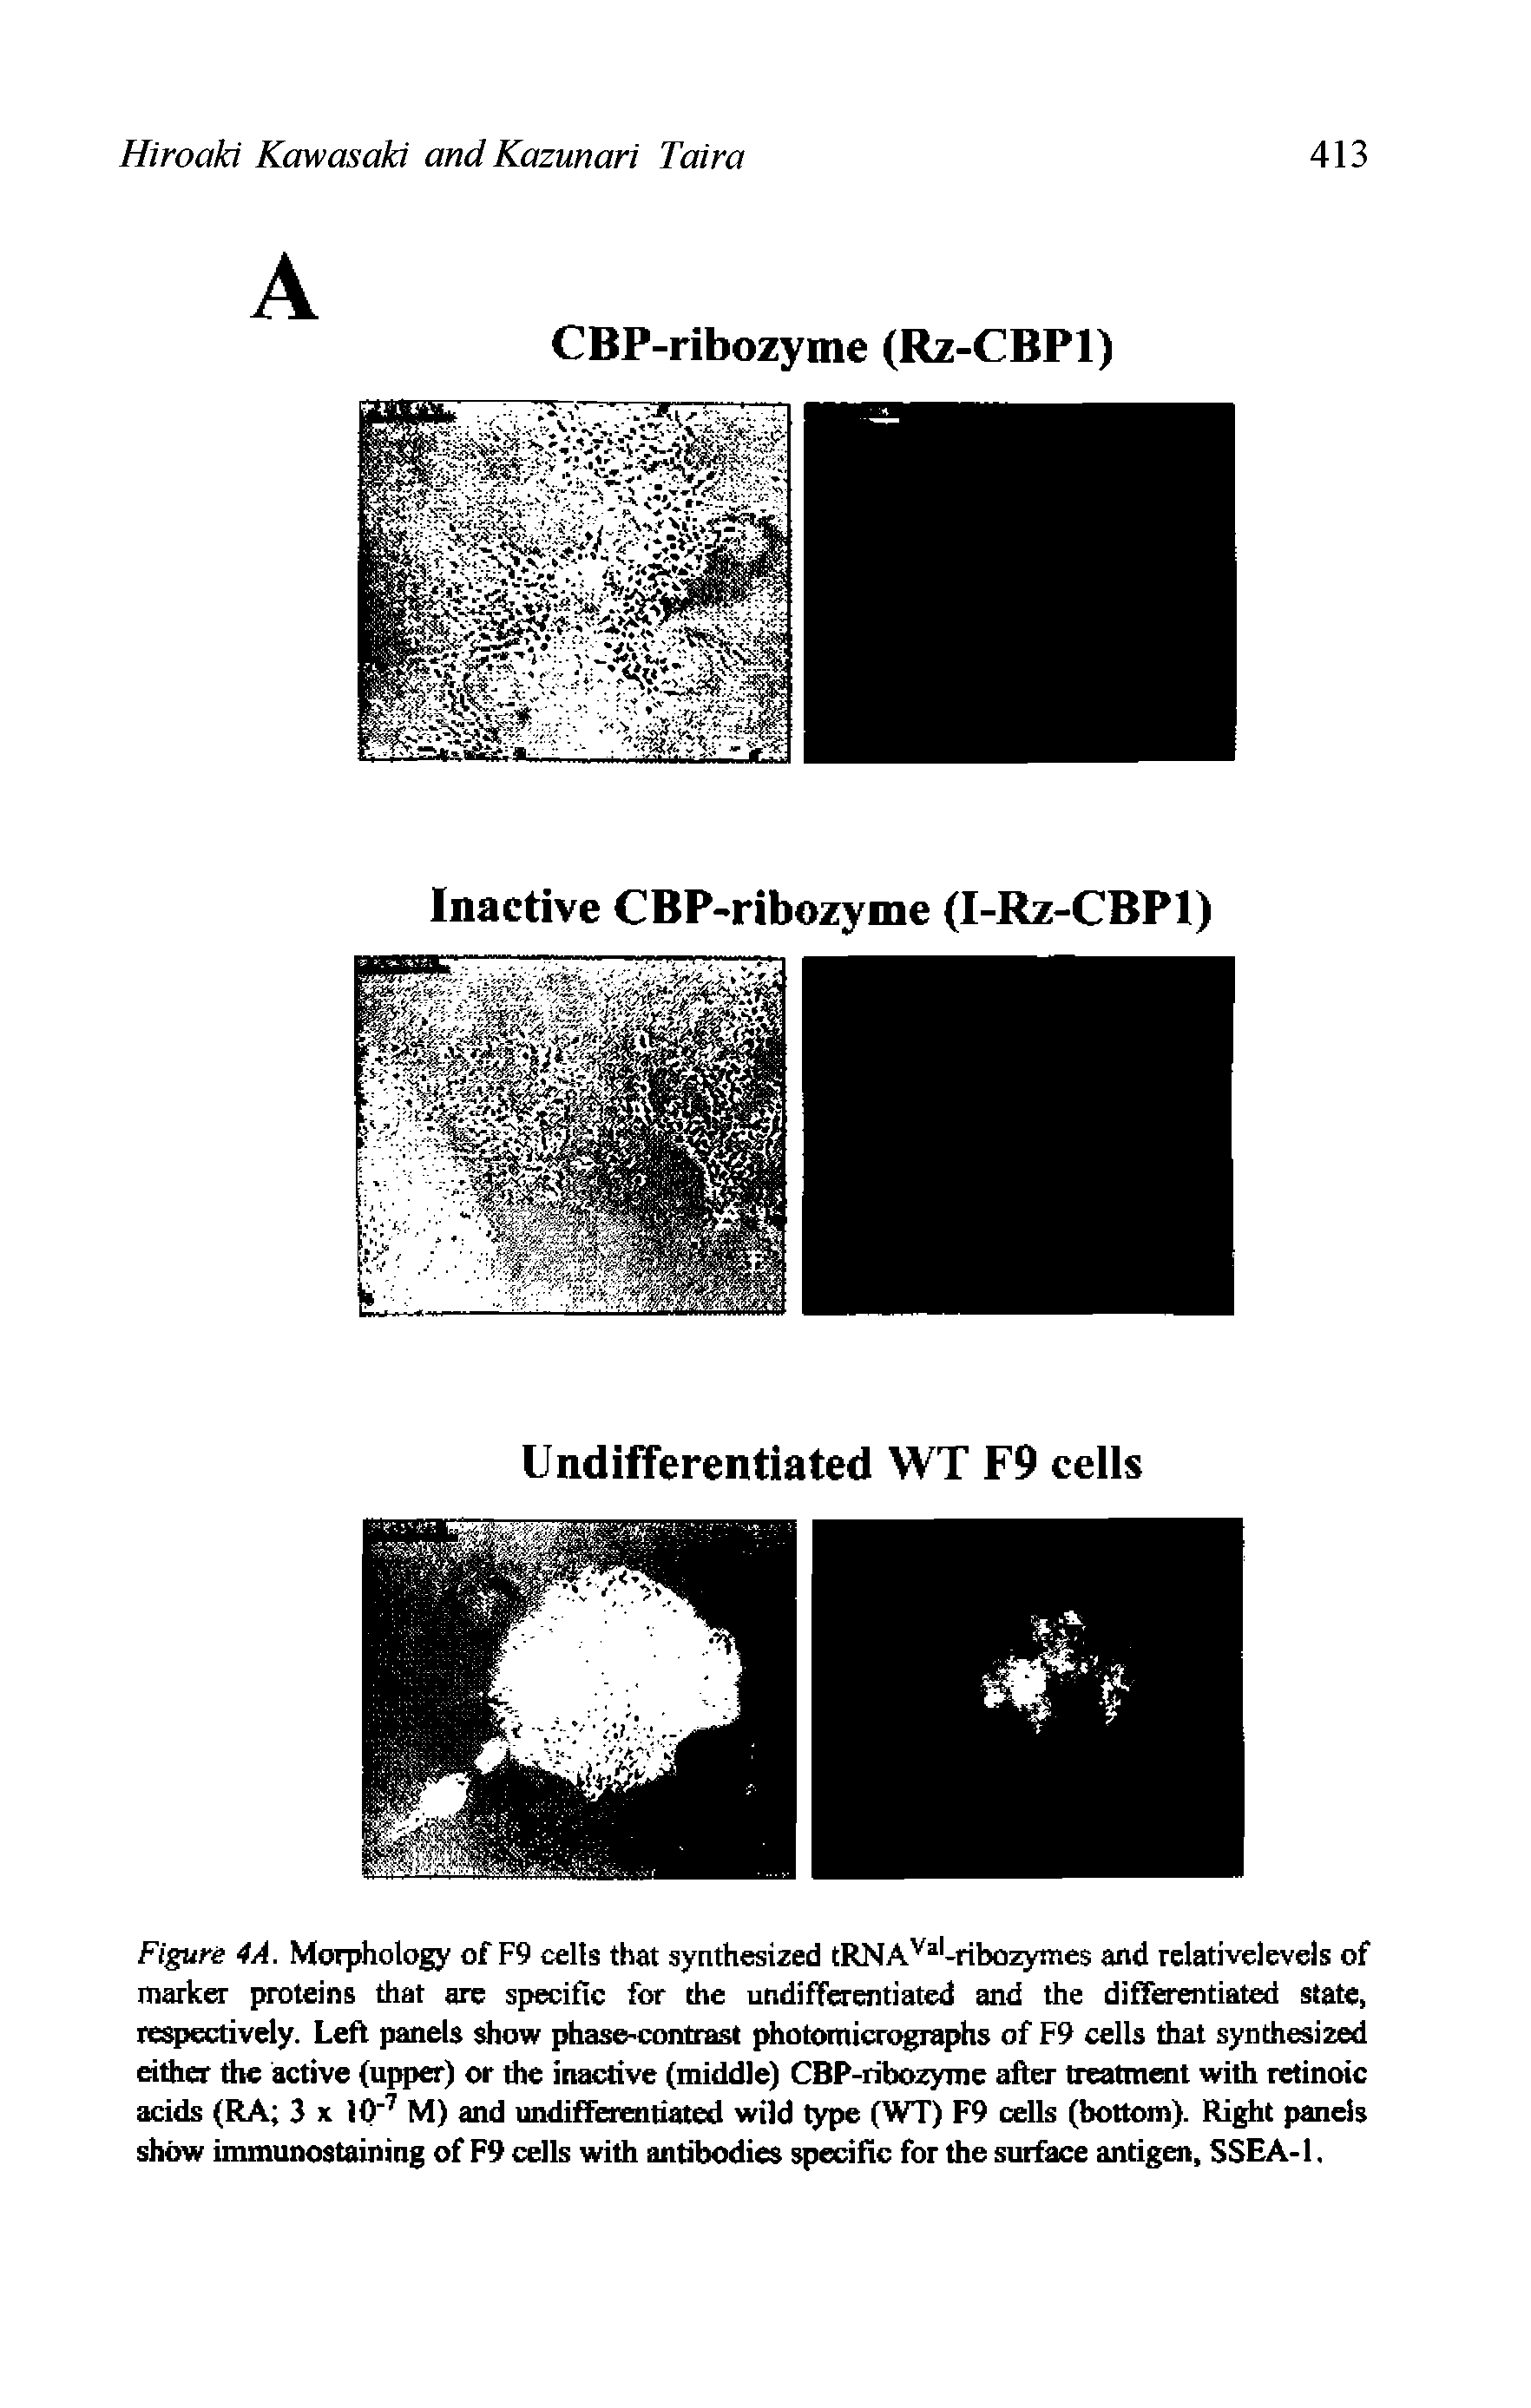 Figure 4A. Morphology of F9 cells that synthesized tRNA -ribozymes and rclativelevels of marker proteins that are s[>ecific for the undifferentiated and the differentiated state, respectively. Left panels show phase Contrast photomicrographs of F9 cells that synthesized either the active (upper) or the inactive (middle) CBP-ribozyme after treatmmt with retinoic adds (RA 3 x U) M) and imdifFeientiated wild type (WT) F9 cells (bottom). Right pands show immunostaining of F9 cells with antibodies spedfic for the surtoce antigen, SSEA-1.